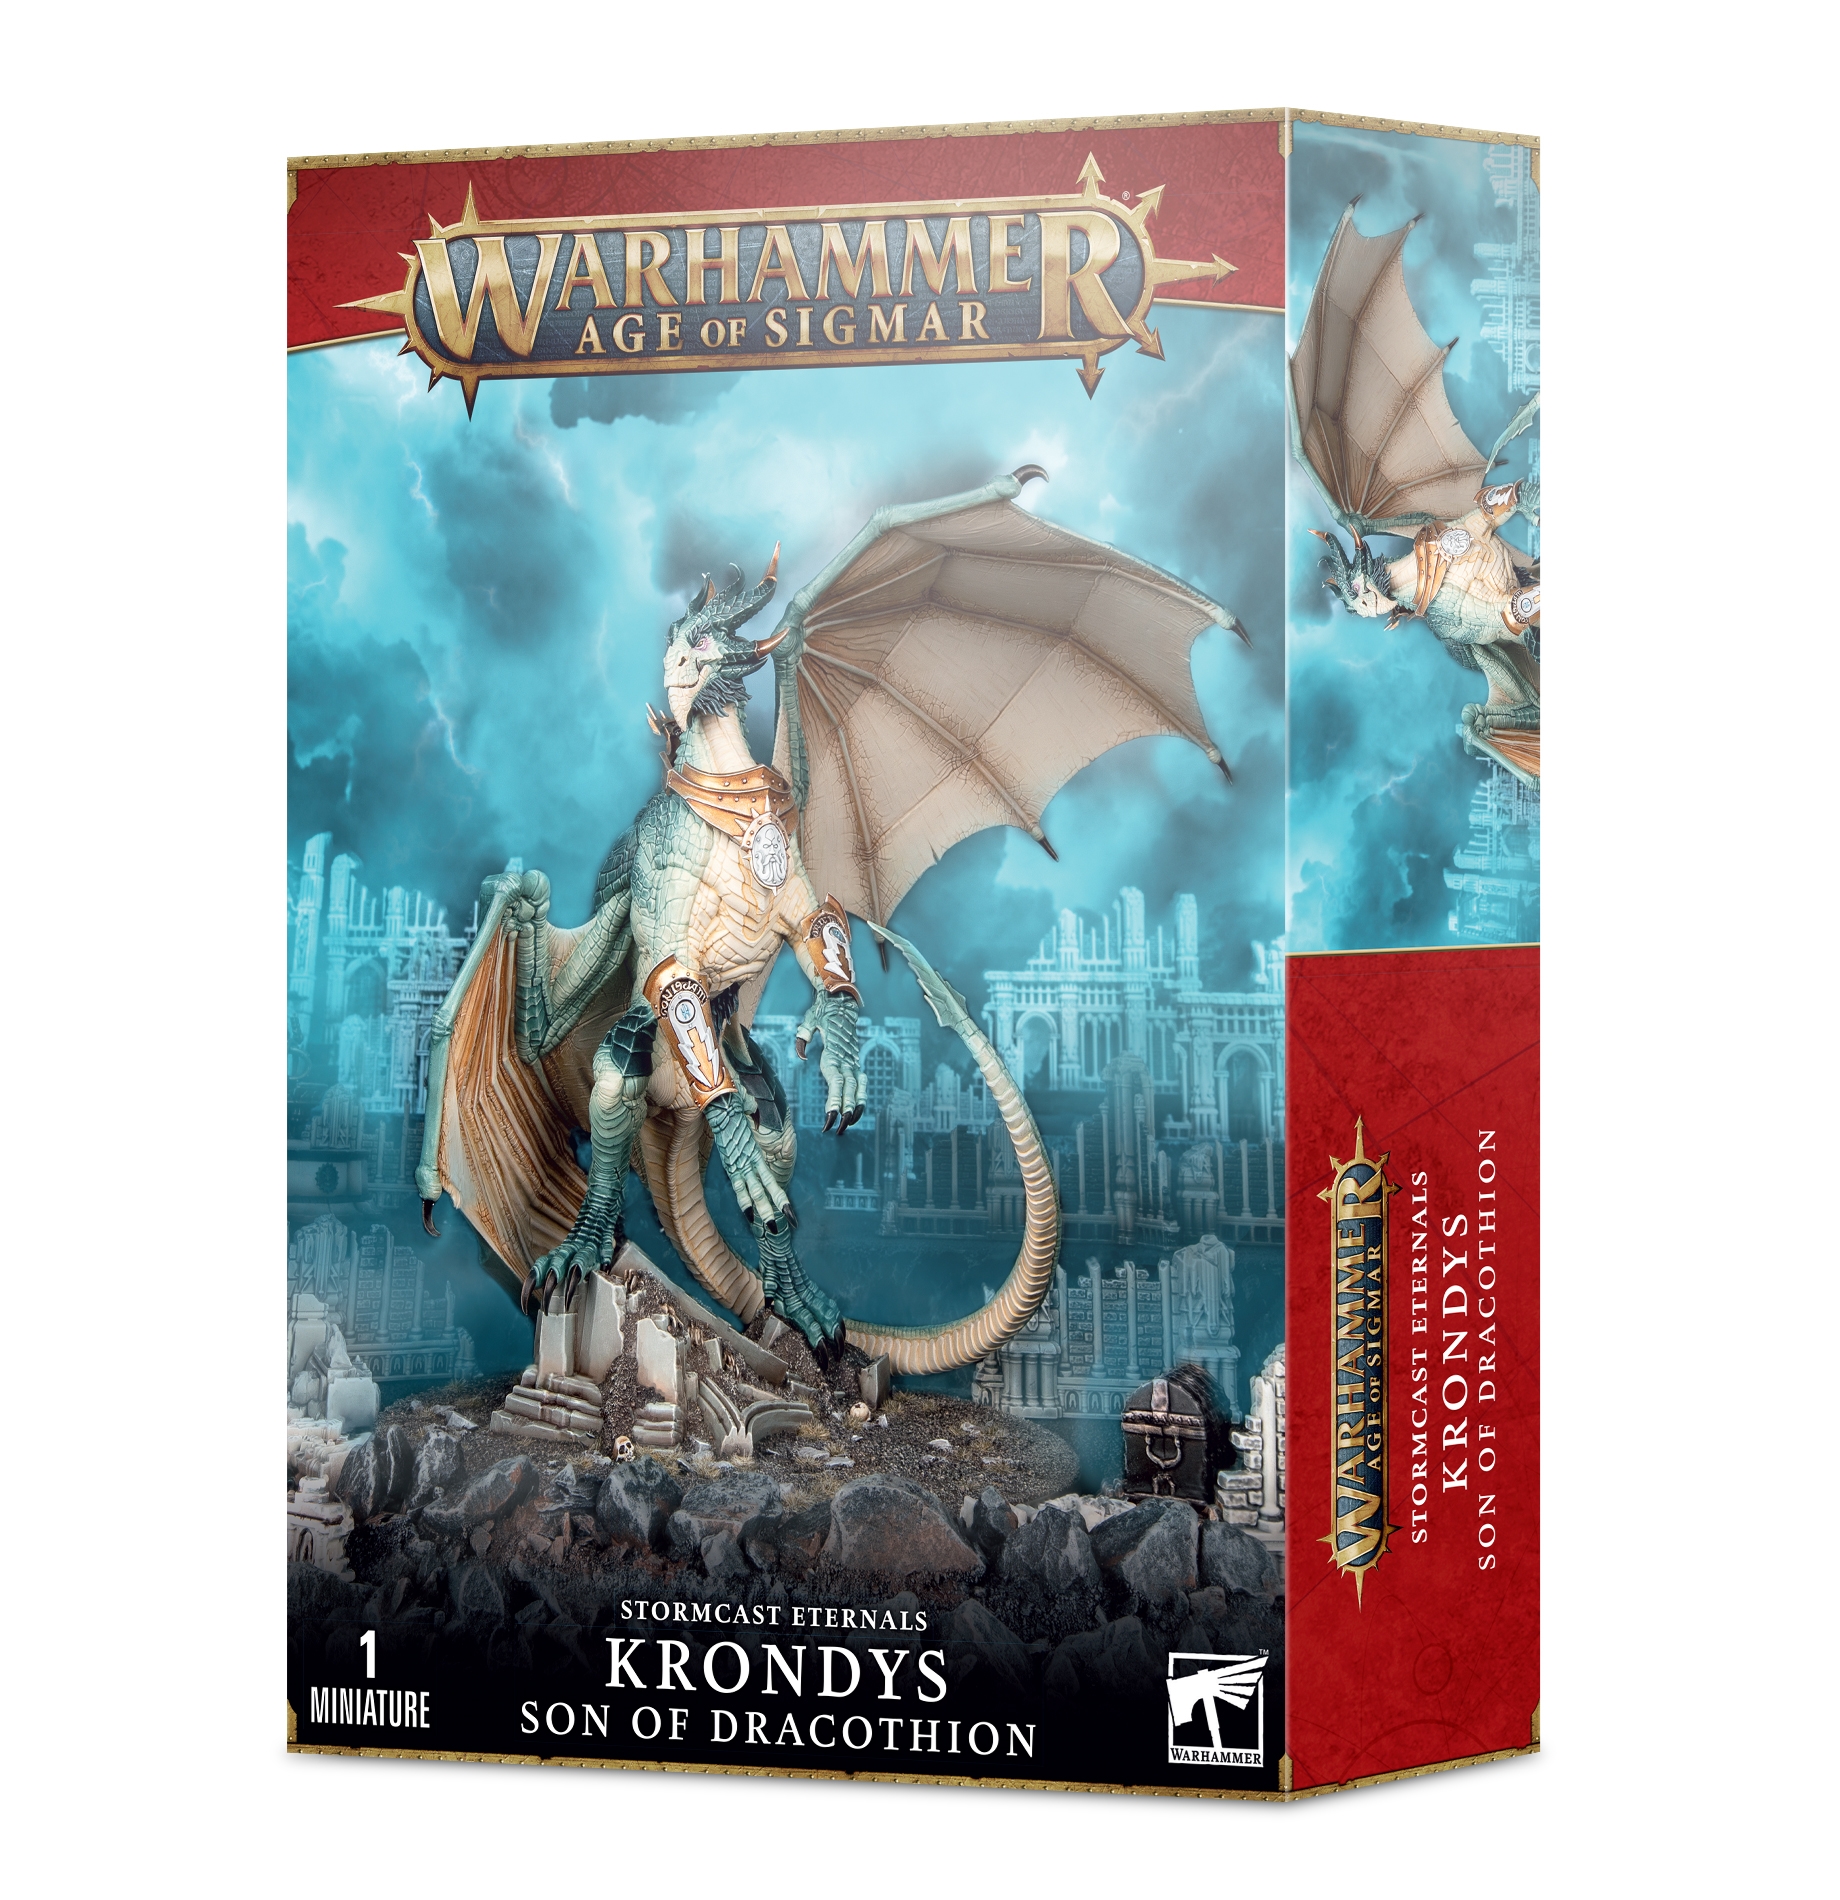 Warhammer Age Of Sigmar: Stormcast Eternals: Krondys - Son of Dracothion 